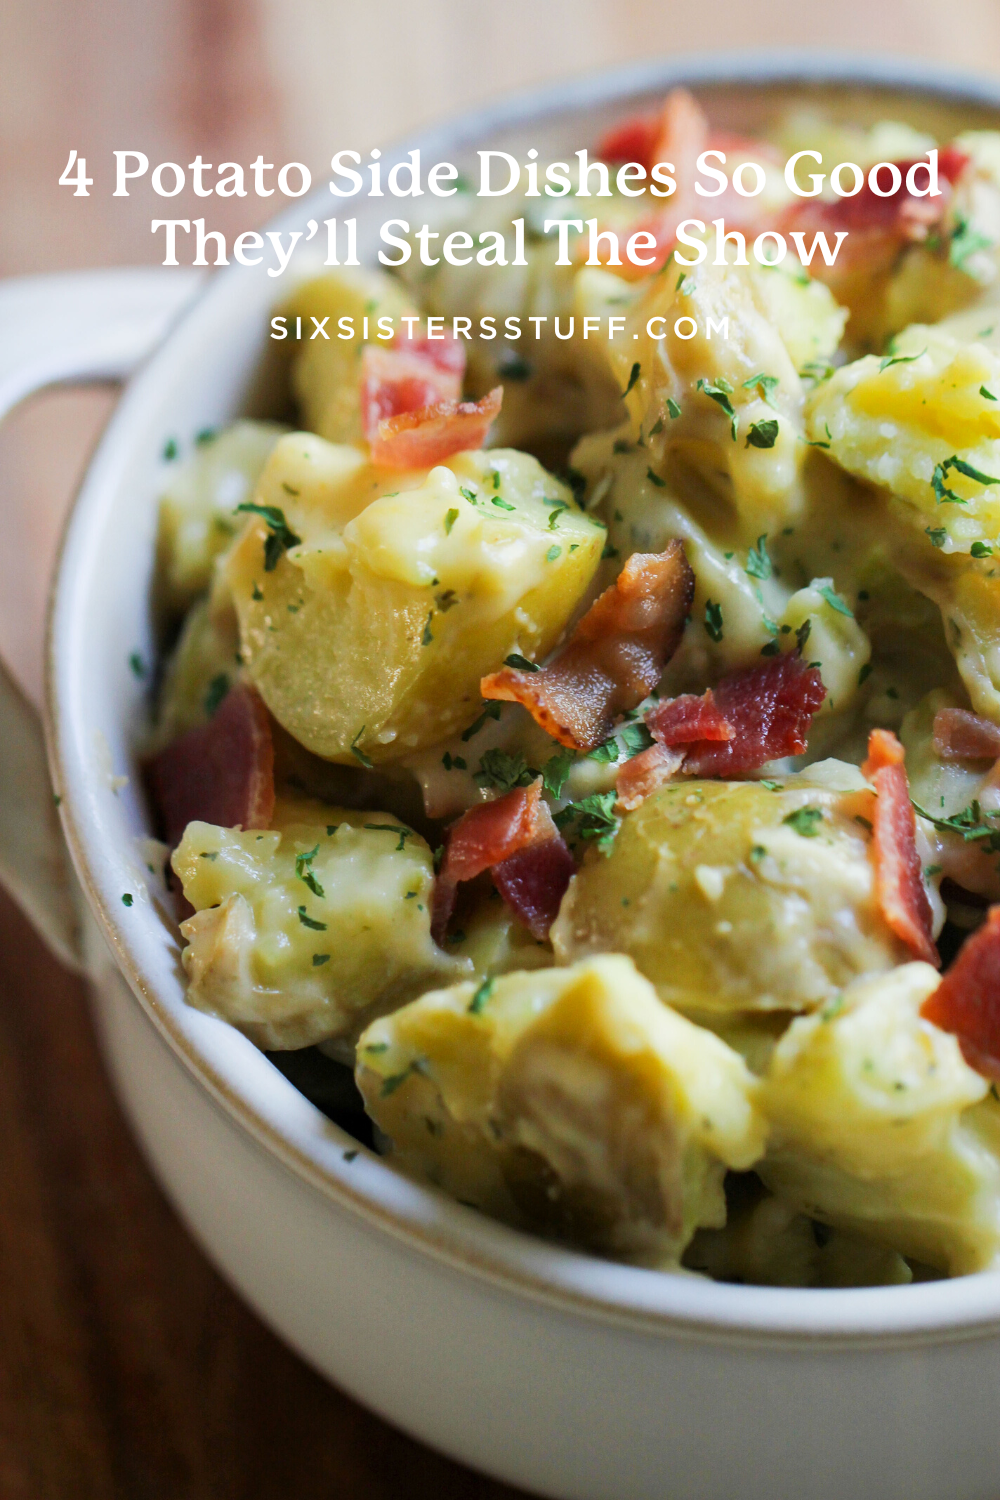 4 Potato Side Dishes So Good They’ll Steal The Show